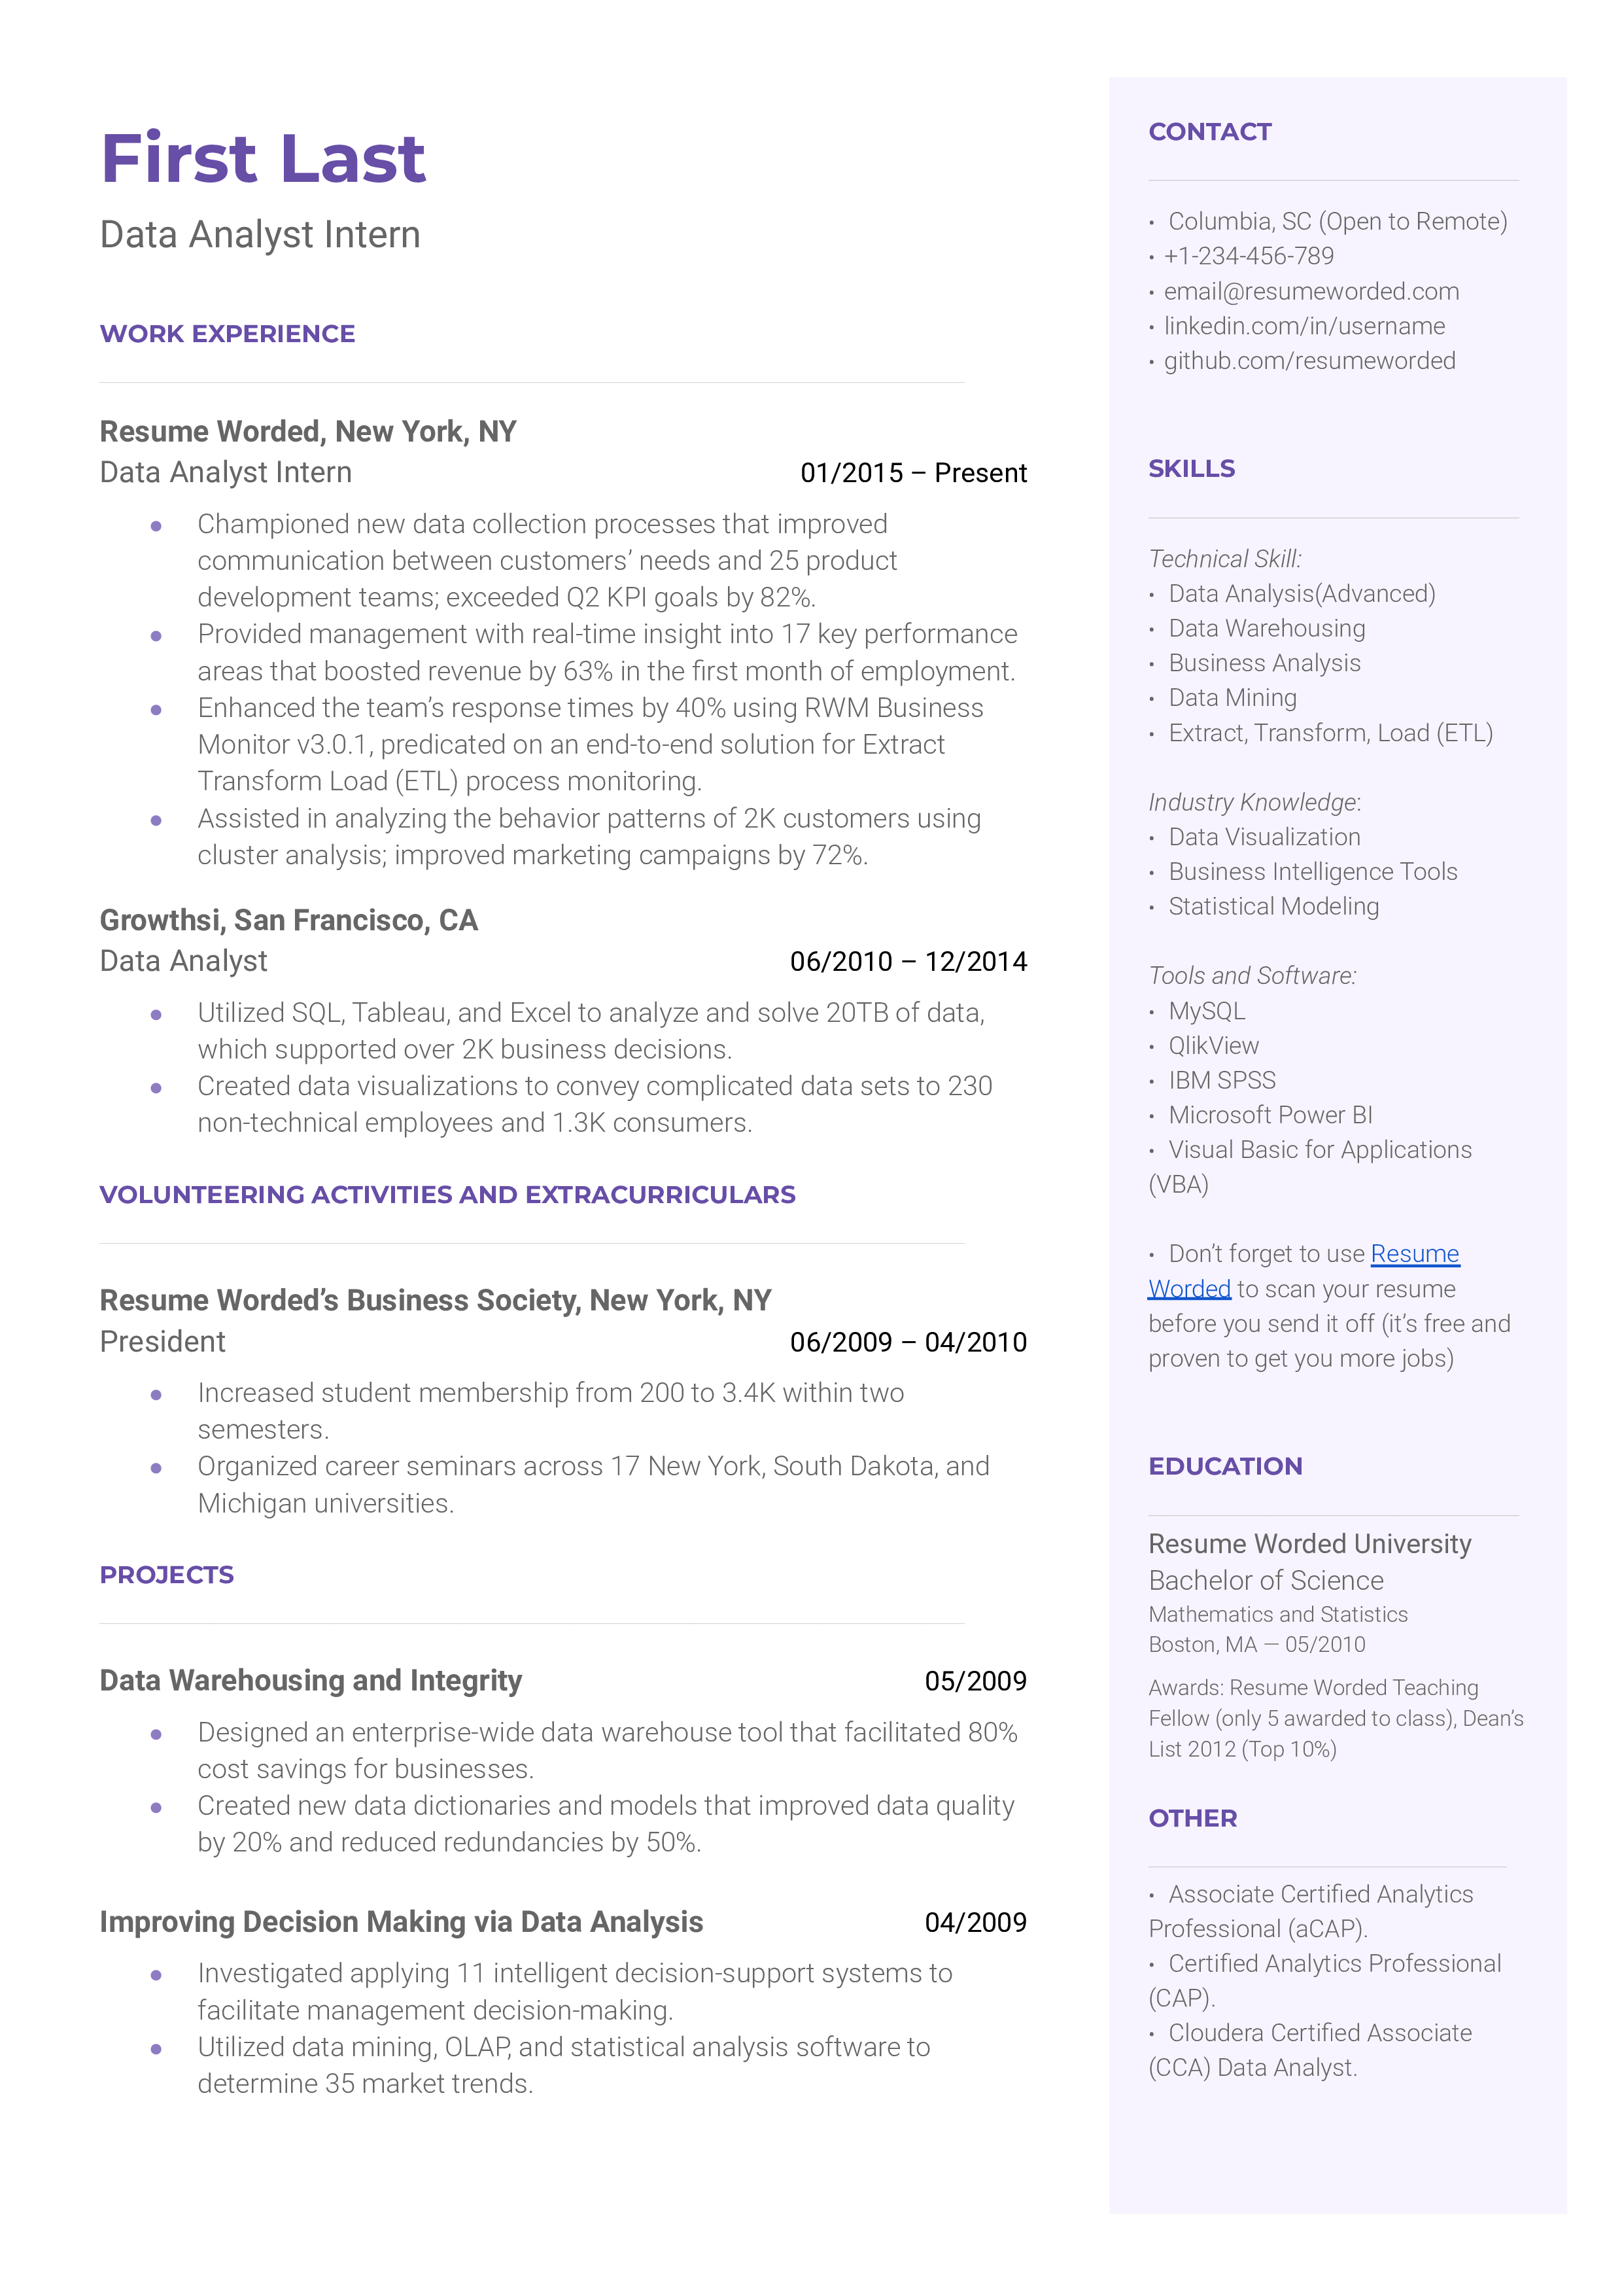 A CV for a Data Analyst Intern showing experience with relevant tools and problem-solving abilities.